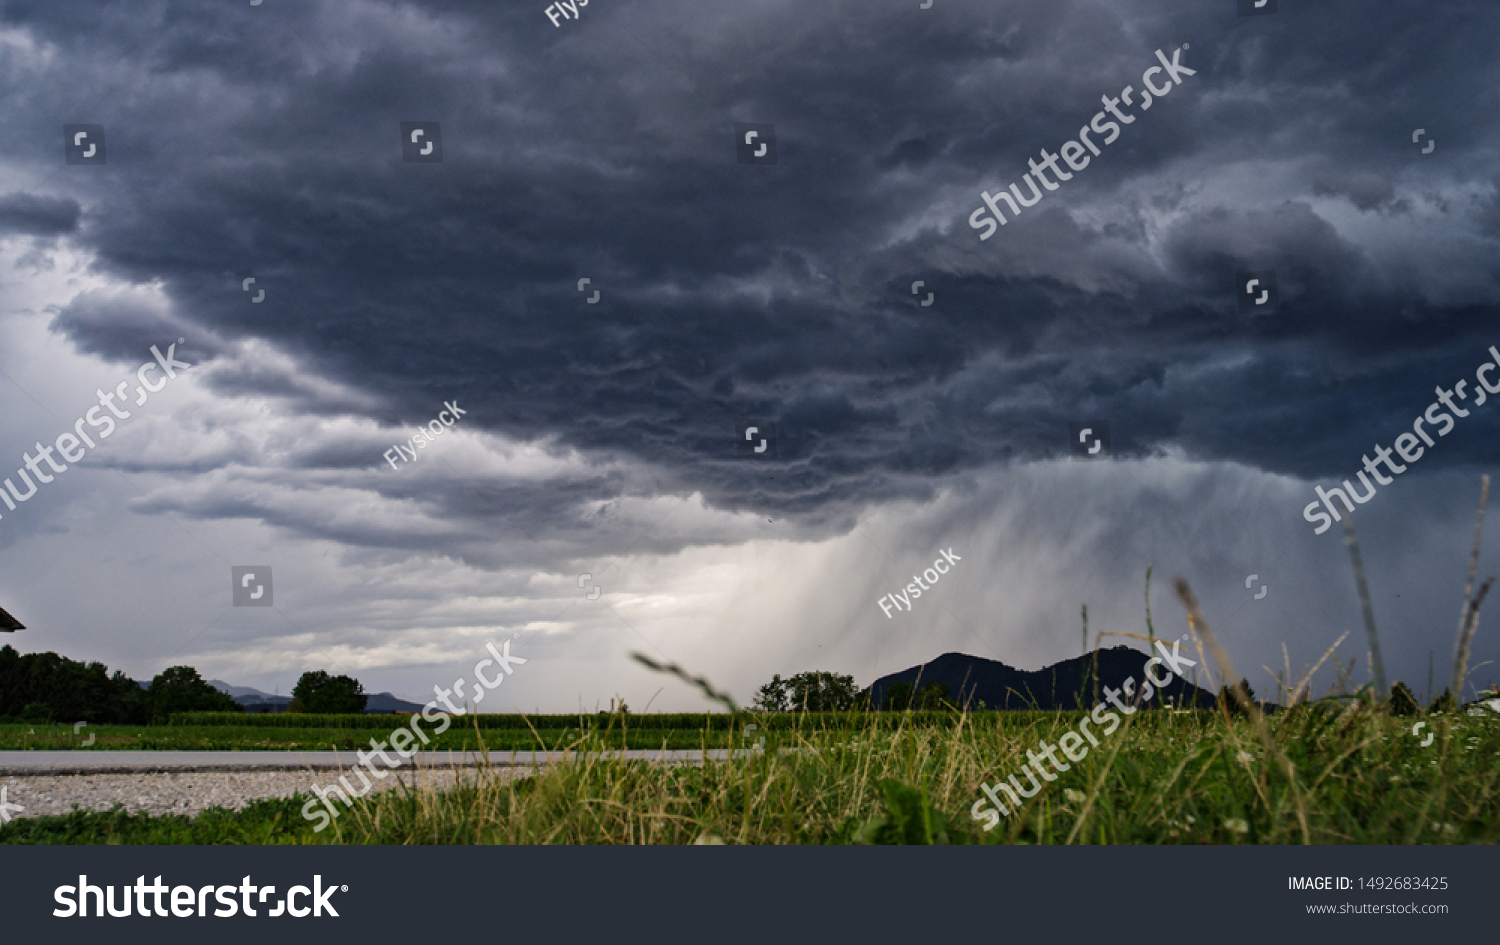 CLOSE UP: Idyllic agricultural farmland with lush maize fields in gorgeous green valley surrounded by forested mountains on stormy summer day. Grass blades swaying in the wind on bad weather evening #1492683425